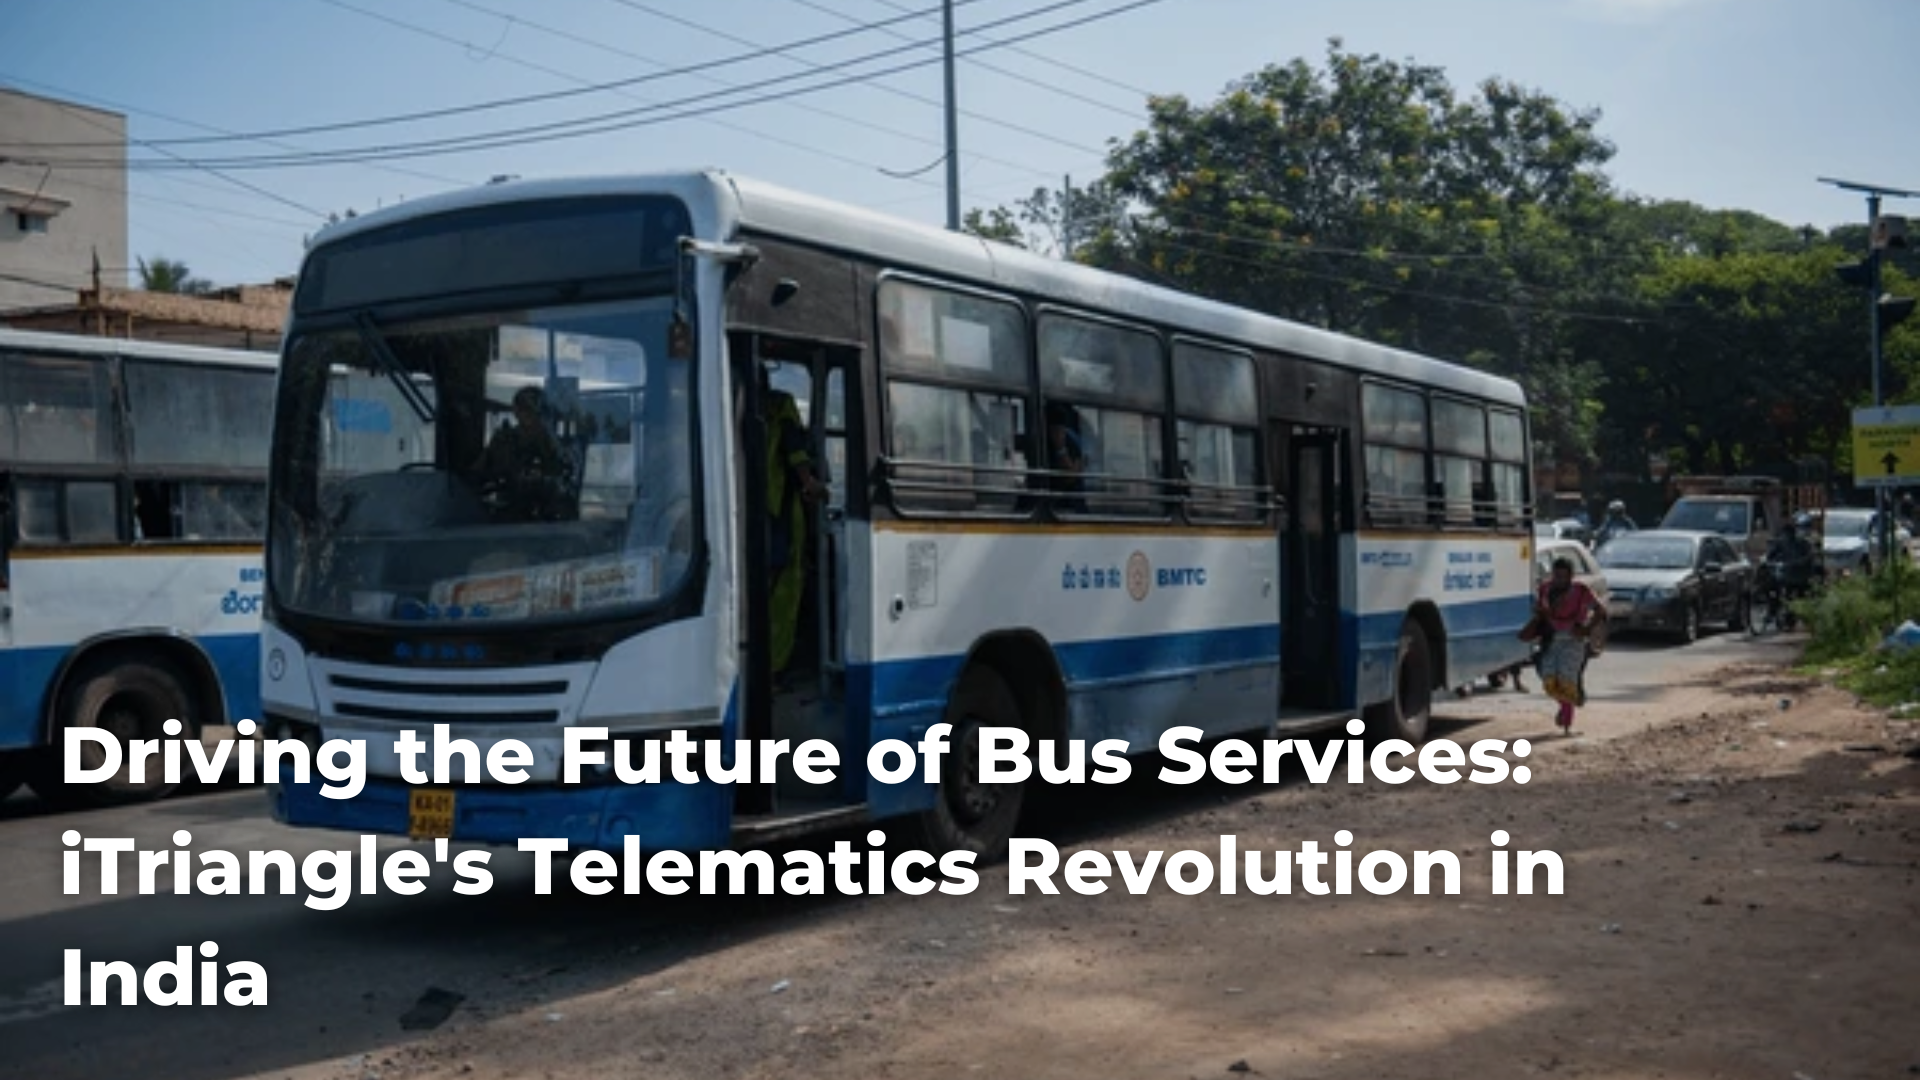 Driving the Future of Bus Services: iTriangle’s Telematics Revolution in India